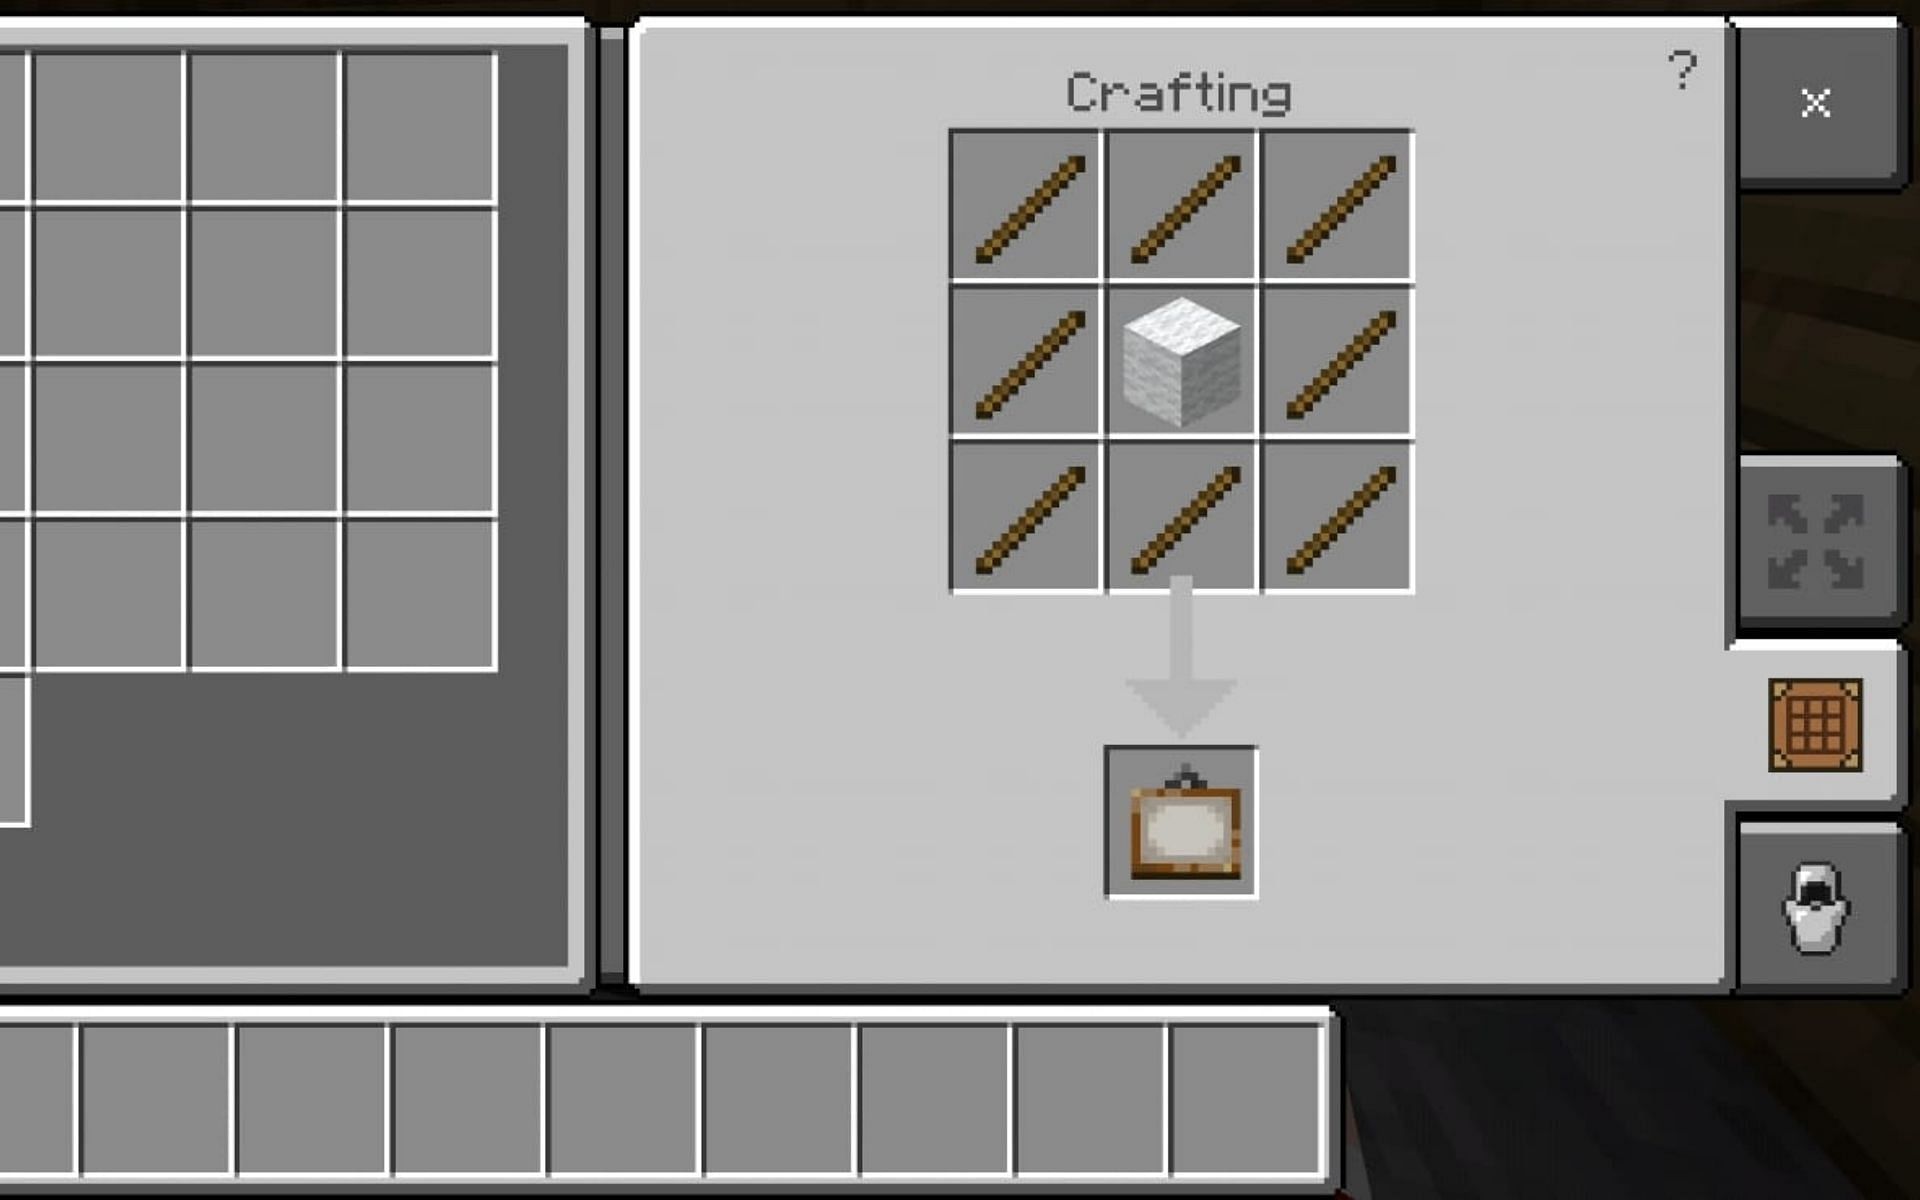 How to create paintings in Minecraft 1.18 update